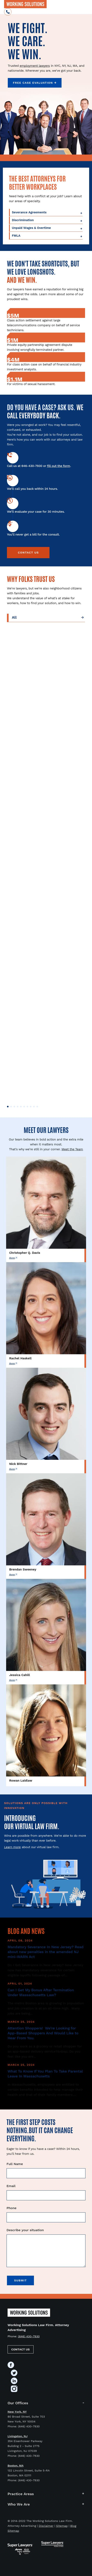 Christopher Q. Davis Law Office - New York NY Lawyers